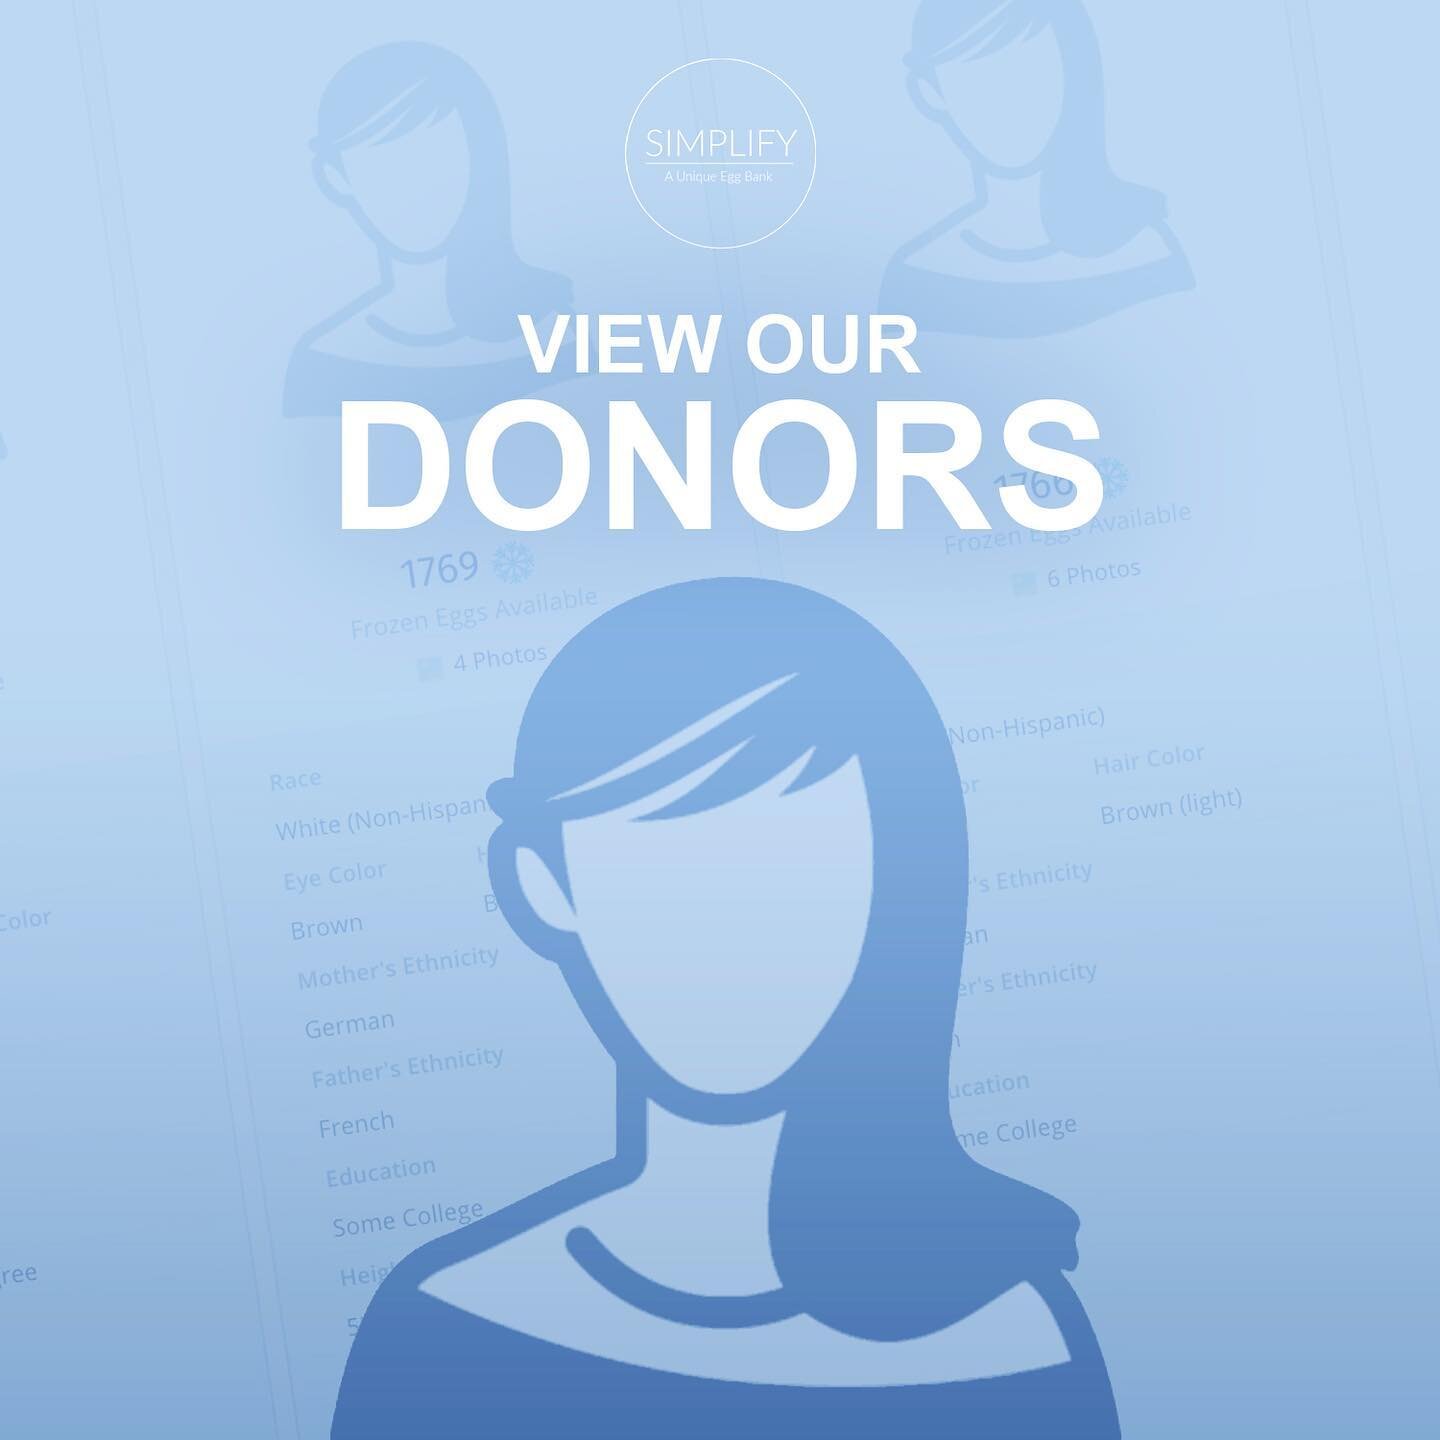 At Simplify we have a diverse group of egg donors ready to help you. 👥

View our current donor pool to find your perfect match. If you&rsquo;re not sure what you&rsquo;re looking for in a donor, we are happy to help with the selection process. Visit